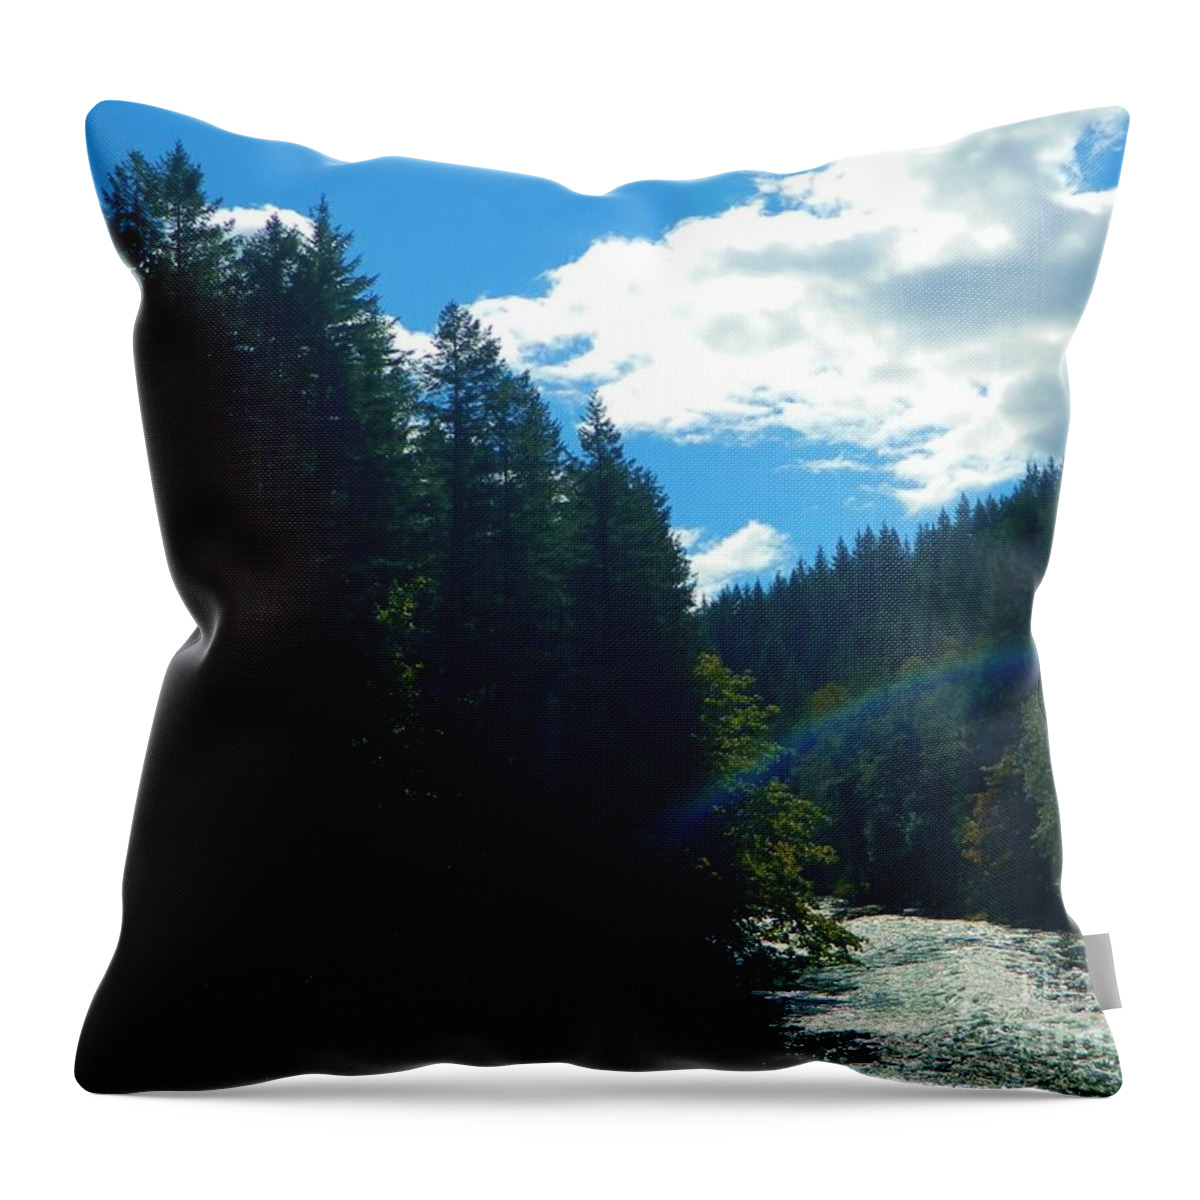 Rainbow Throw Pillow featuring the photograph River Rainbow by Gallery Of Hope 